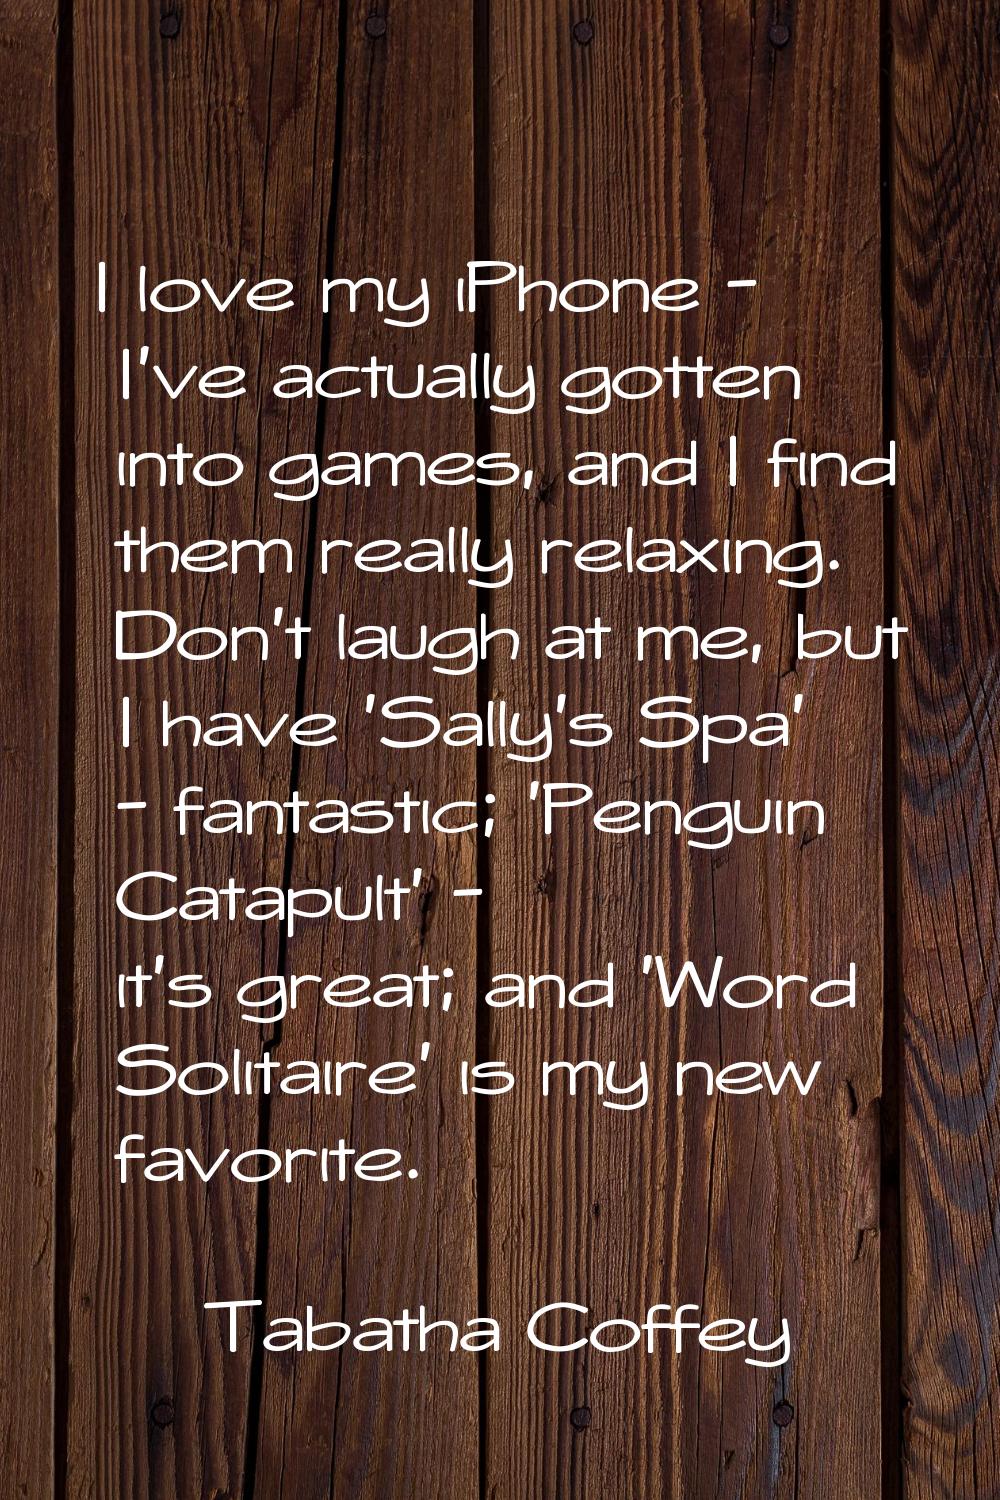 I love my iPhone - I've actually gotten into games, and I find them really relaxing. Don't laugh at